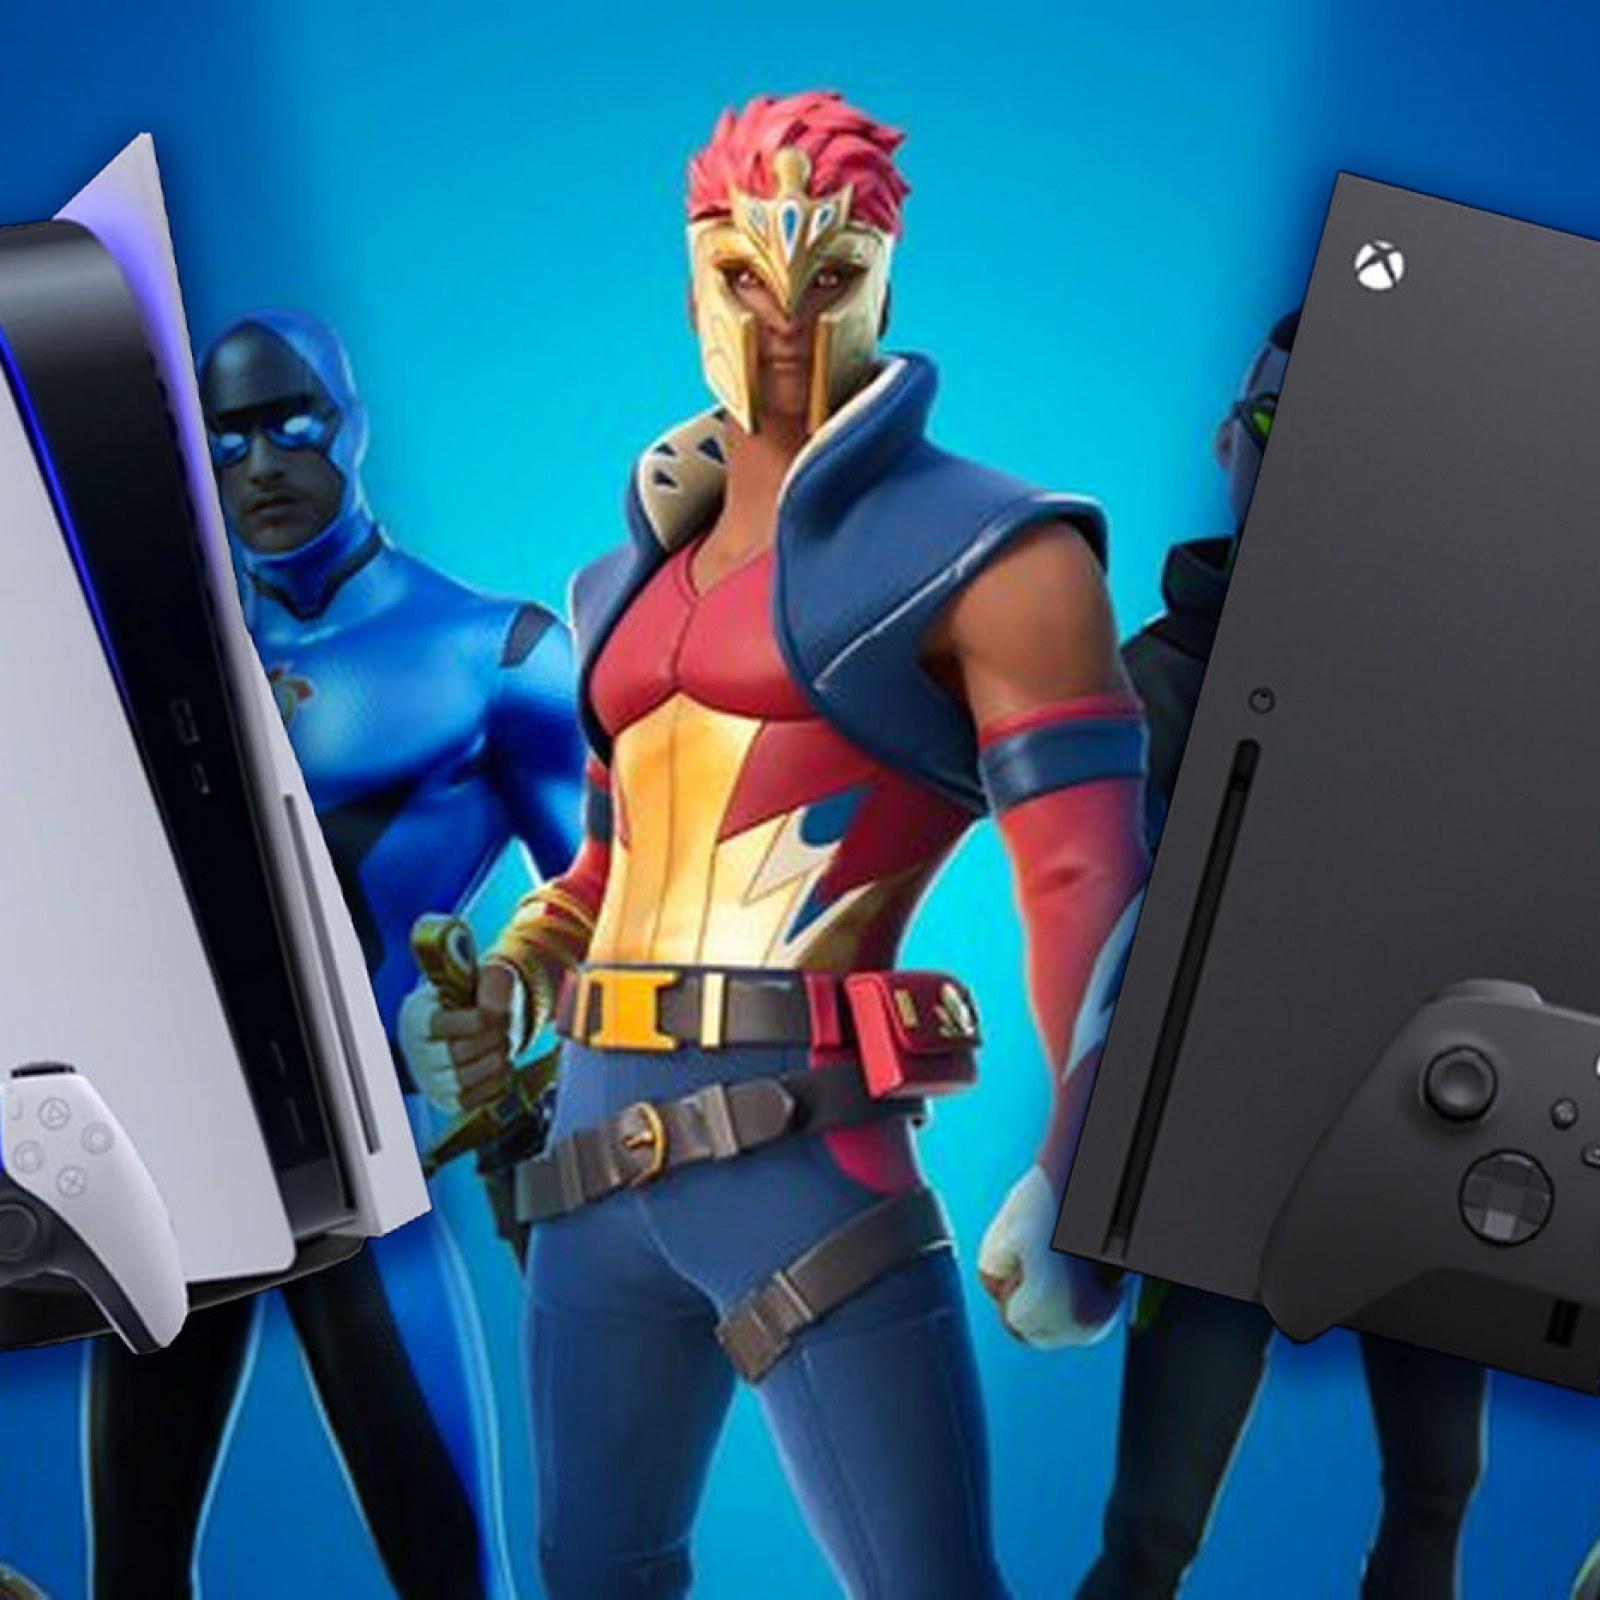 First-Person Fortnite Could Be Coming to PS5, PS4 Next Season